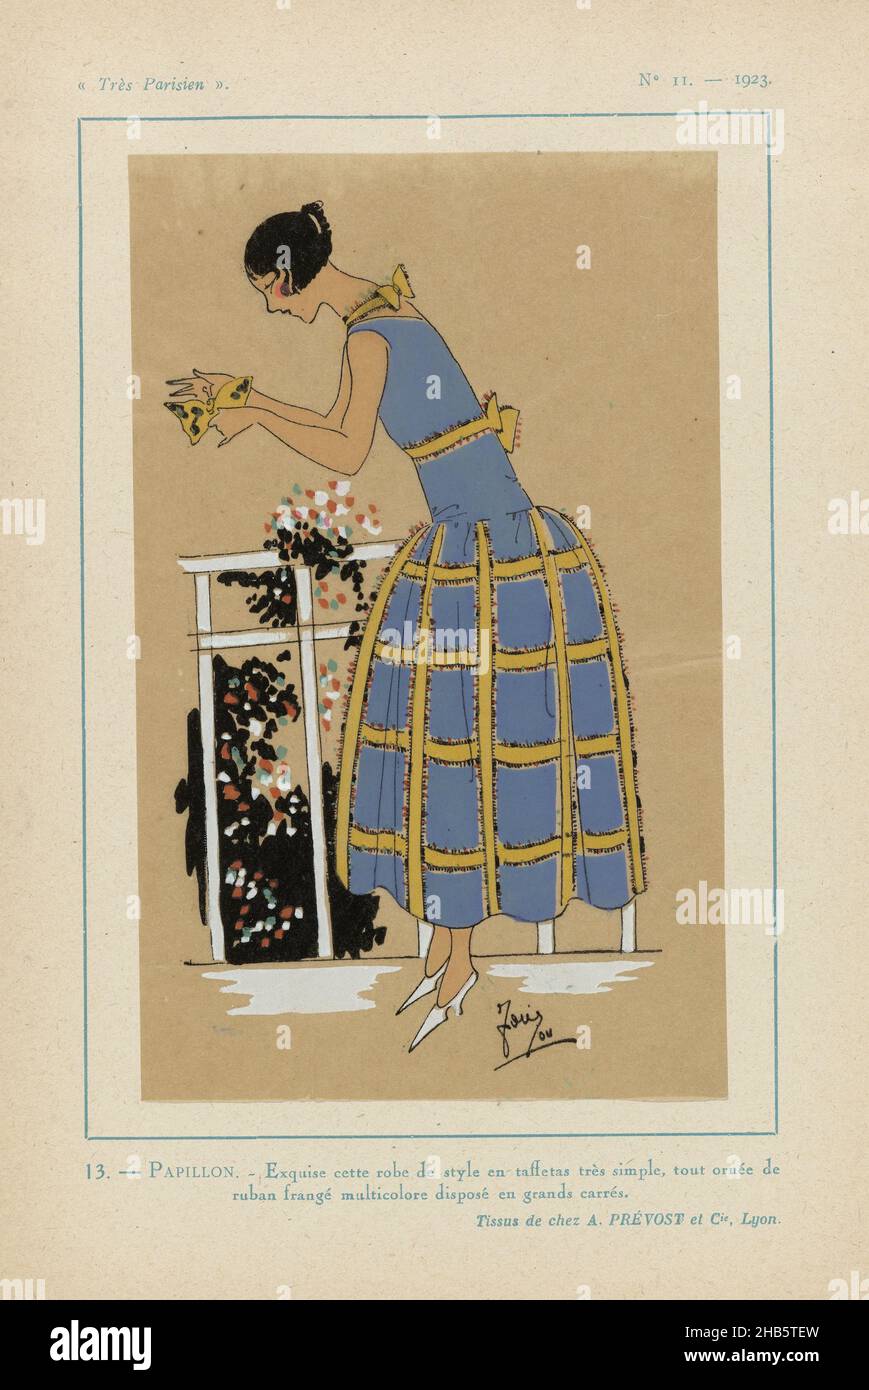 Très Parisien 1923 No 11: 13.- PAPILLON. - Exquise cette robe de style..., ' Robe de style' . Gown with wide skirt of taffeta, entirely decorated with  multi-colored fringe band, applied in large